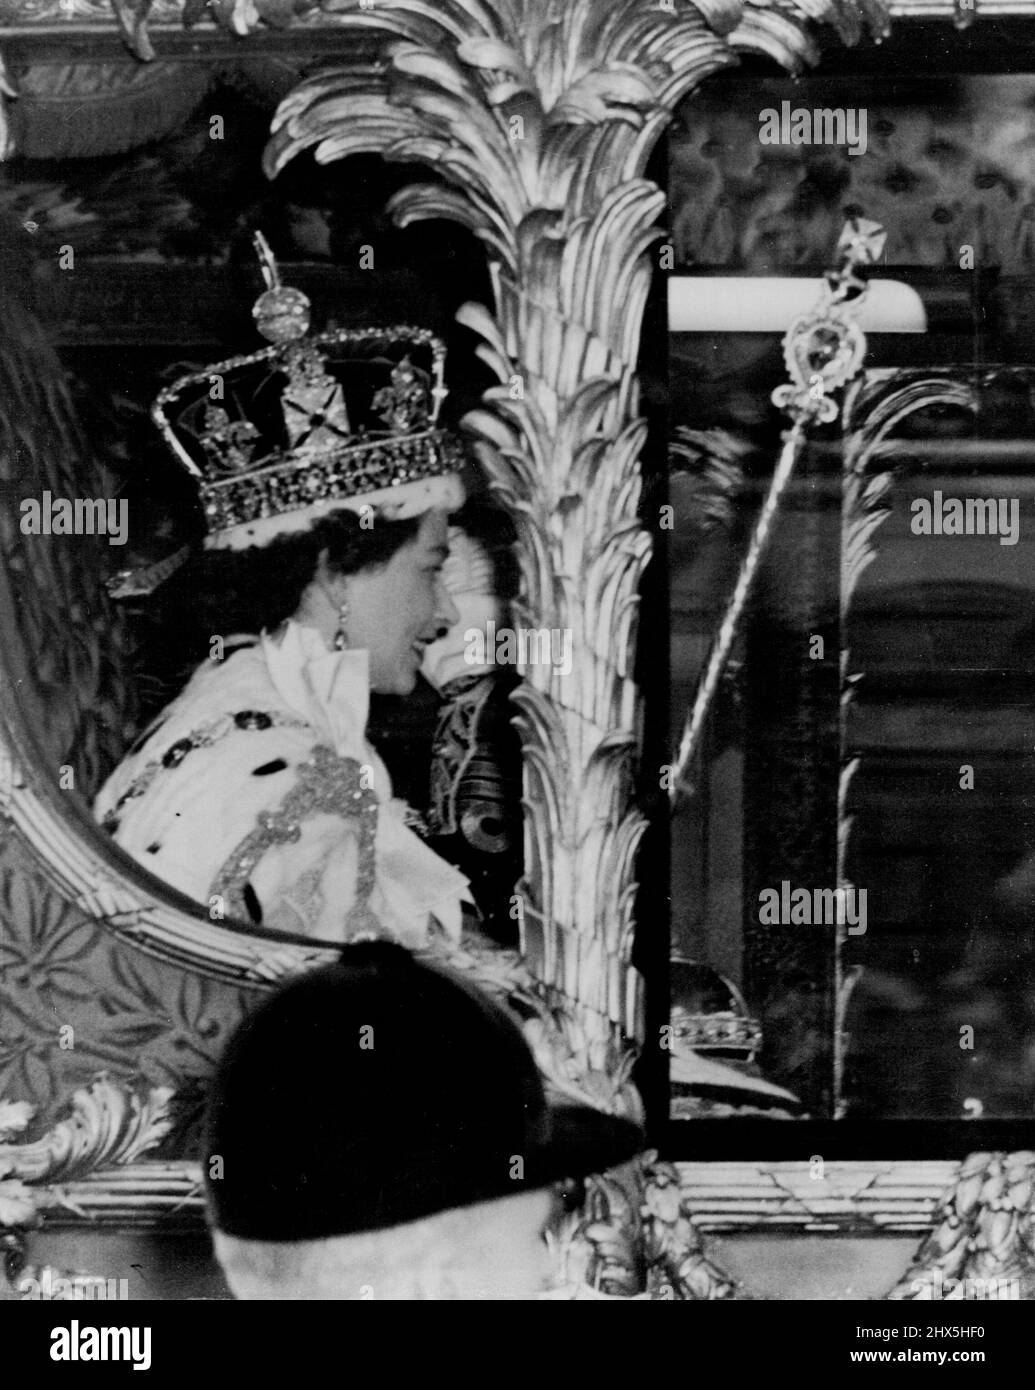 The Queen, Crowned, Returns in Triumph To Palace The Queen wears the Imperial State Crown on her had as she acknowledges the cheers from the many thousands who packed the Royal route after her crowning in Westminster abbey. The golden coach in which she is traveling was returning her to Buckingham Palace. The picture was taken in Whitehall. June 02, 1953. Stock Photo